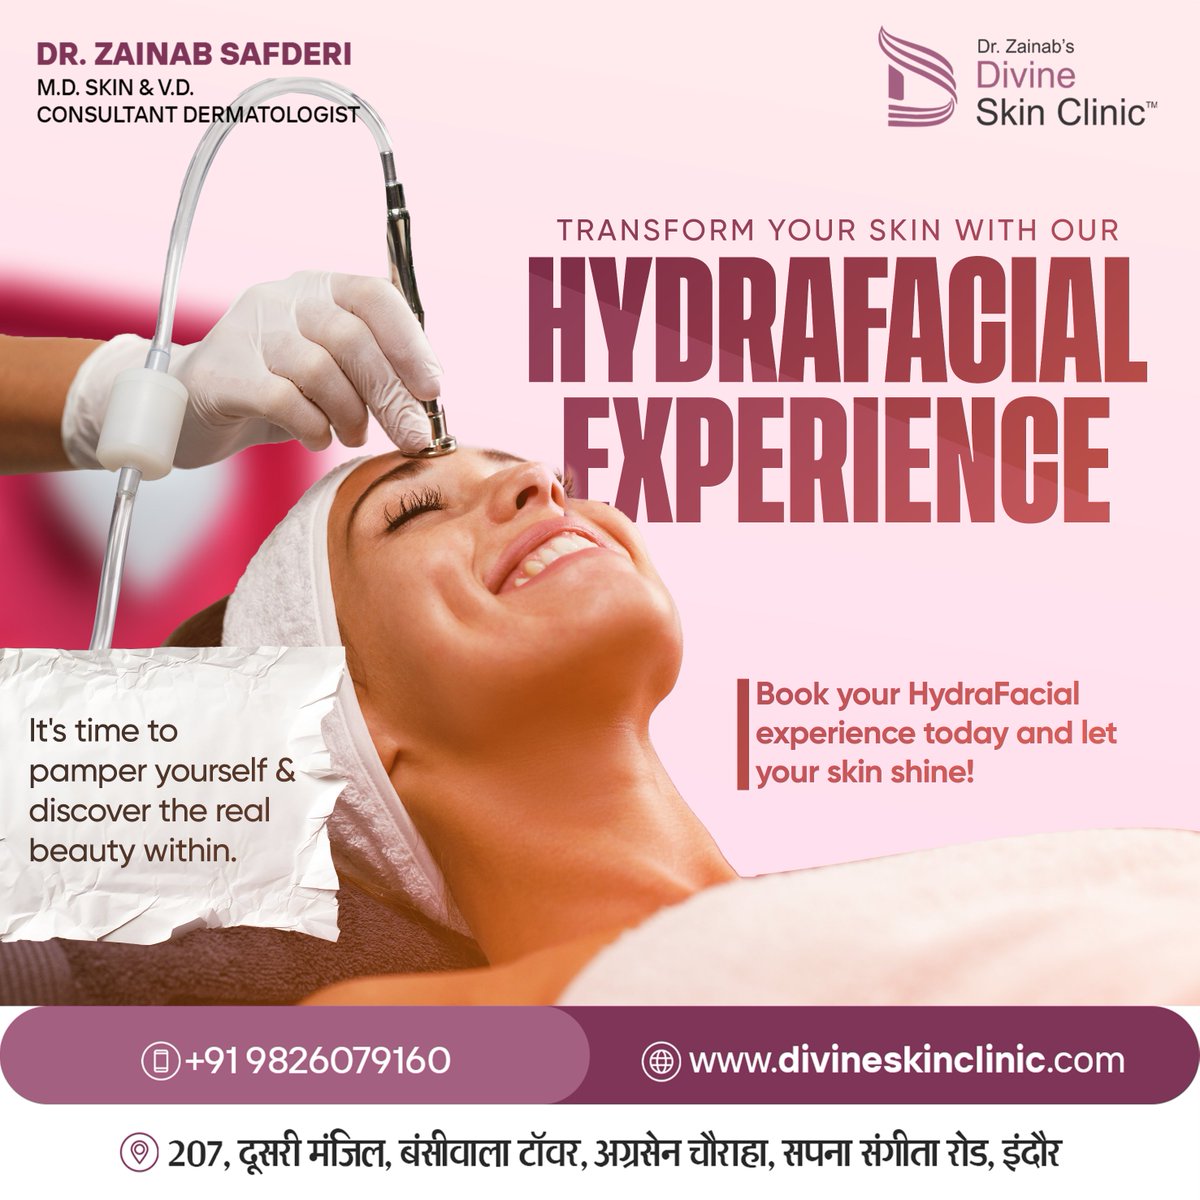 Experience the power of advanced technology for a luminous, youthful complexion💫🤍 Contact Dr. Zainab Safderi! 📞+91 9826079160 📍207, Bansiwala Tower, Near, Agrasen Square, Navlakha, Indore #hydration #skinclear #SuperFacial #OxyGeneoTreatment #DivineSkinClinic #OxygenEO